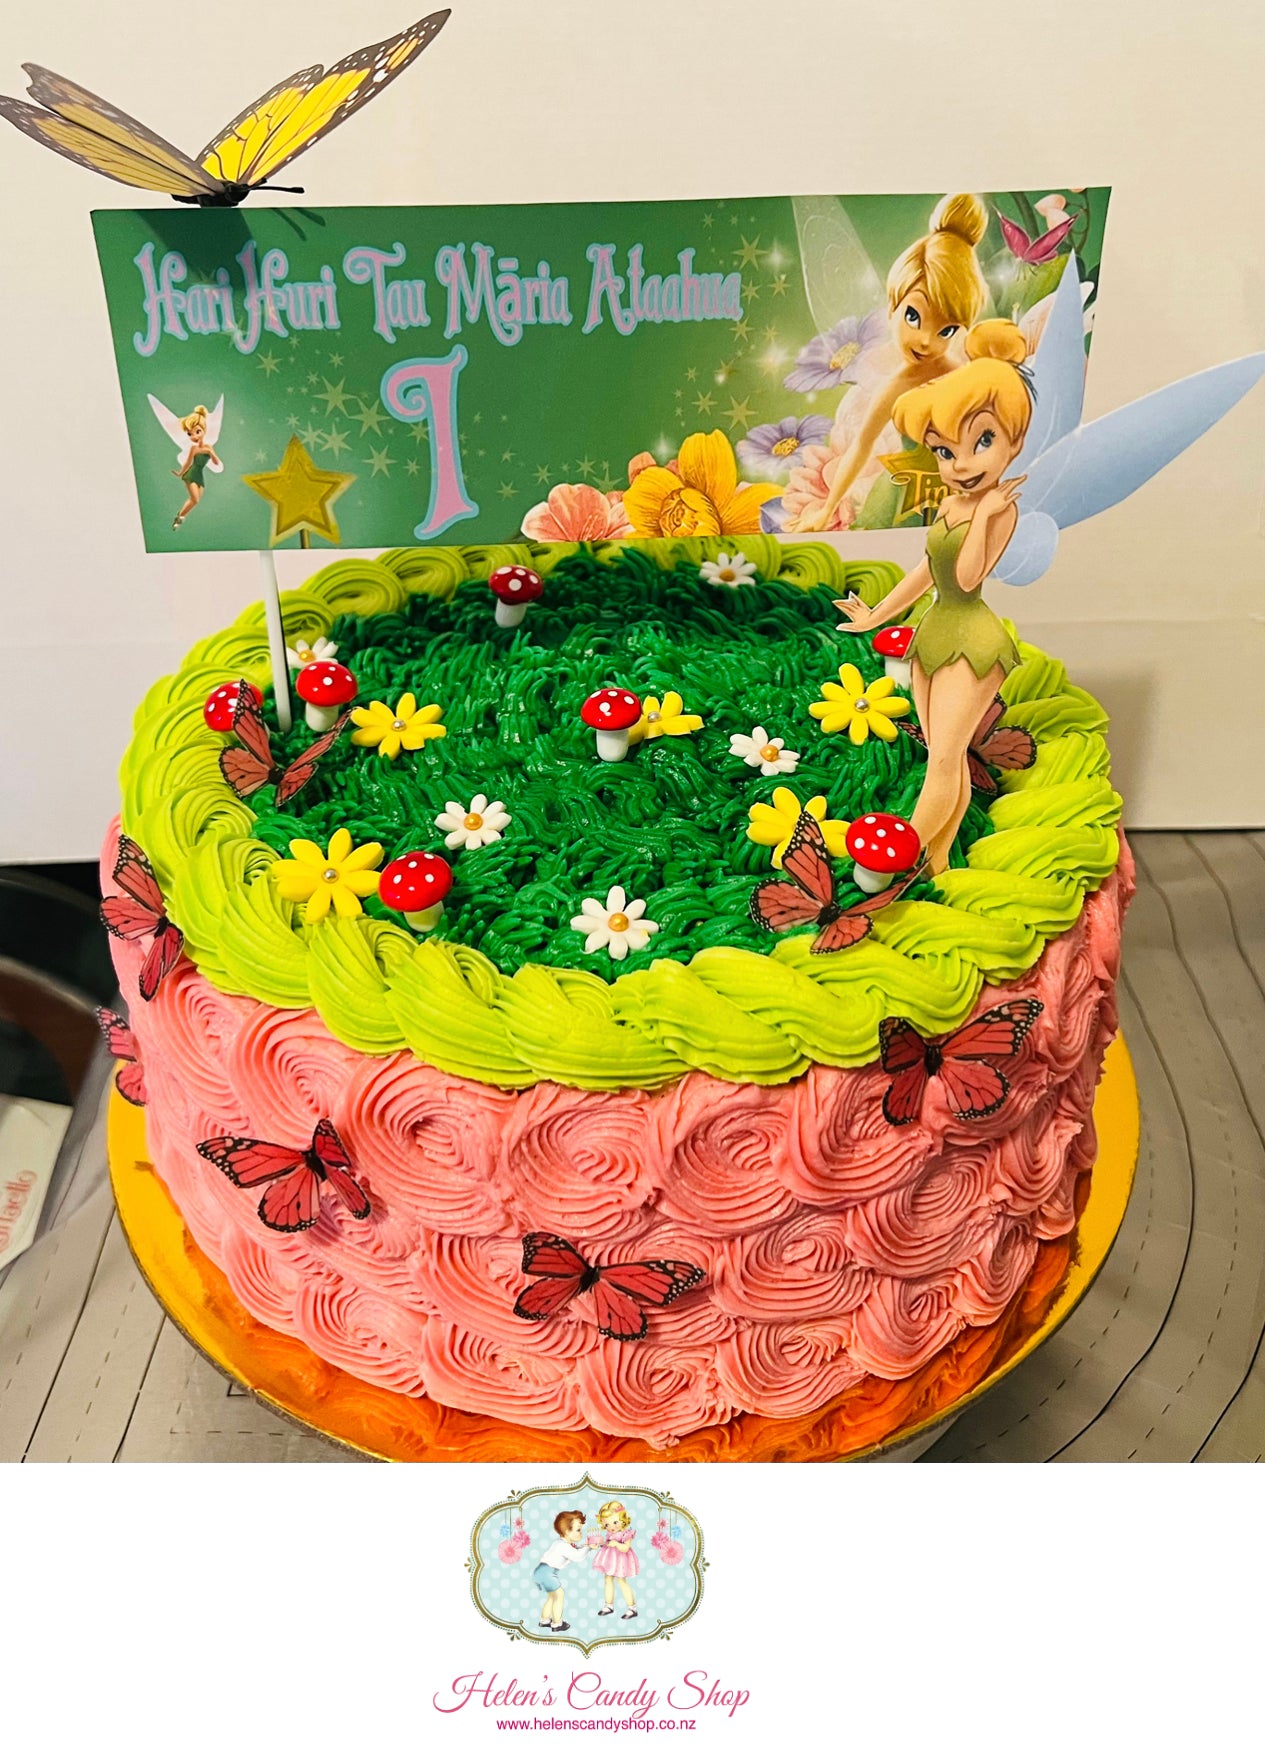 Unicorn, Bees, Butterfly & Fairy Themed Celebration Cakes